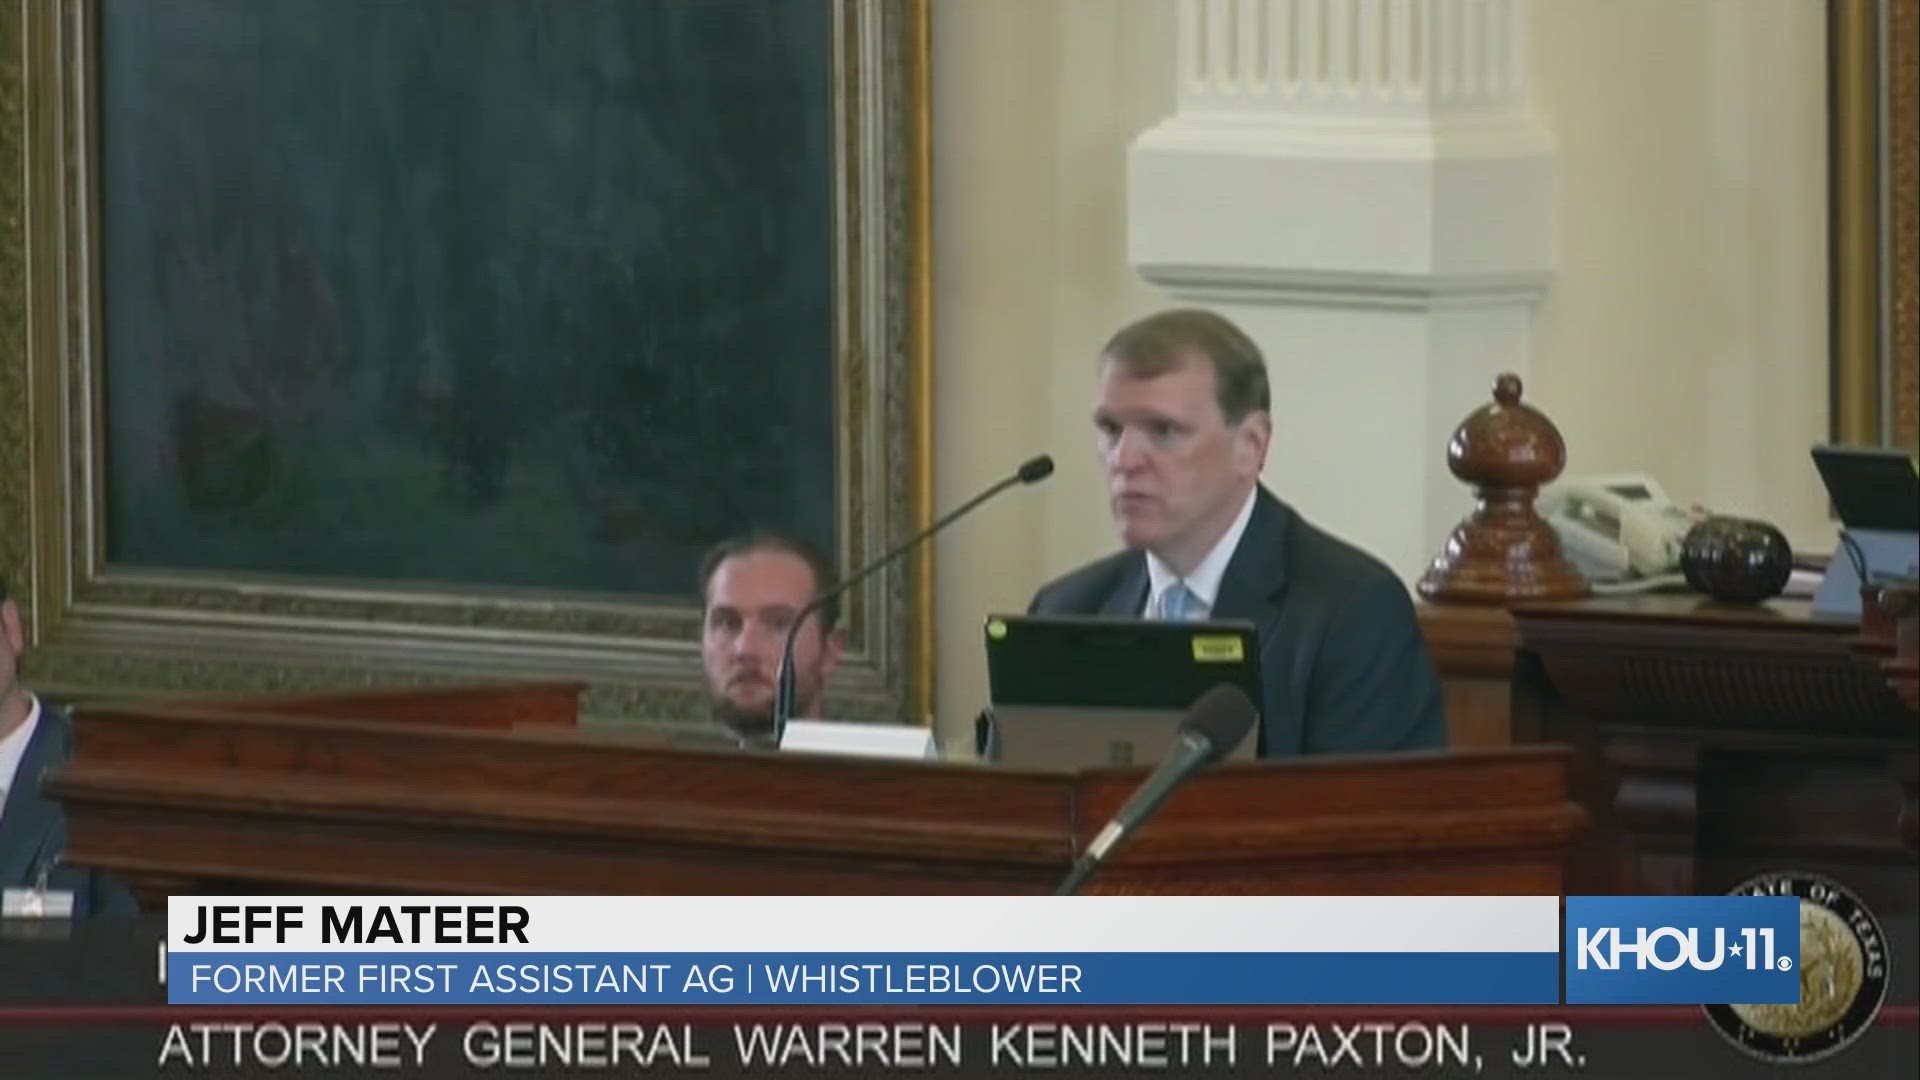 Mateer is a former Paxton aide.  He testified Tuesday as the first witness called.